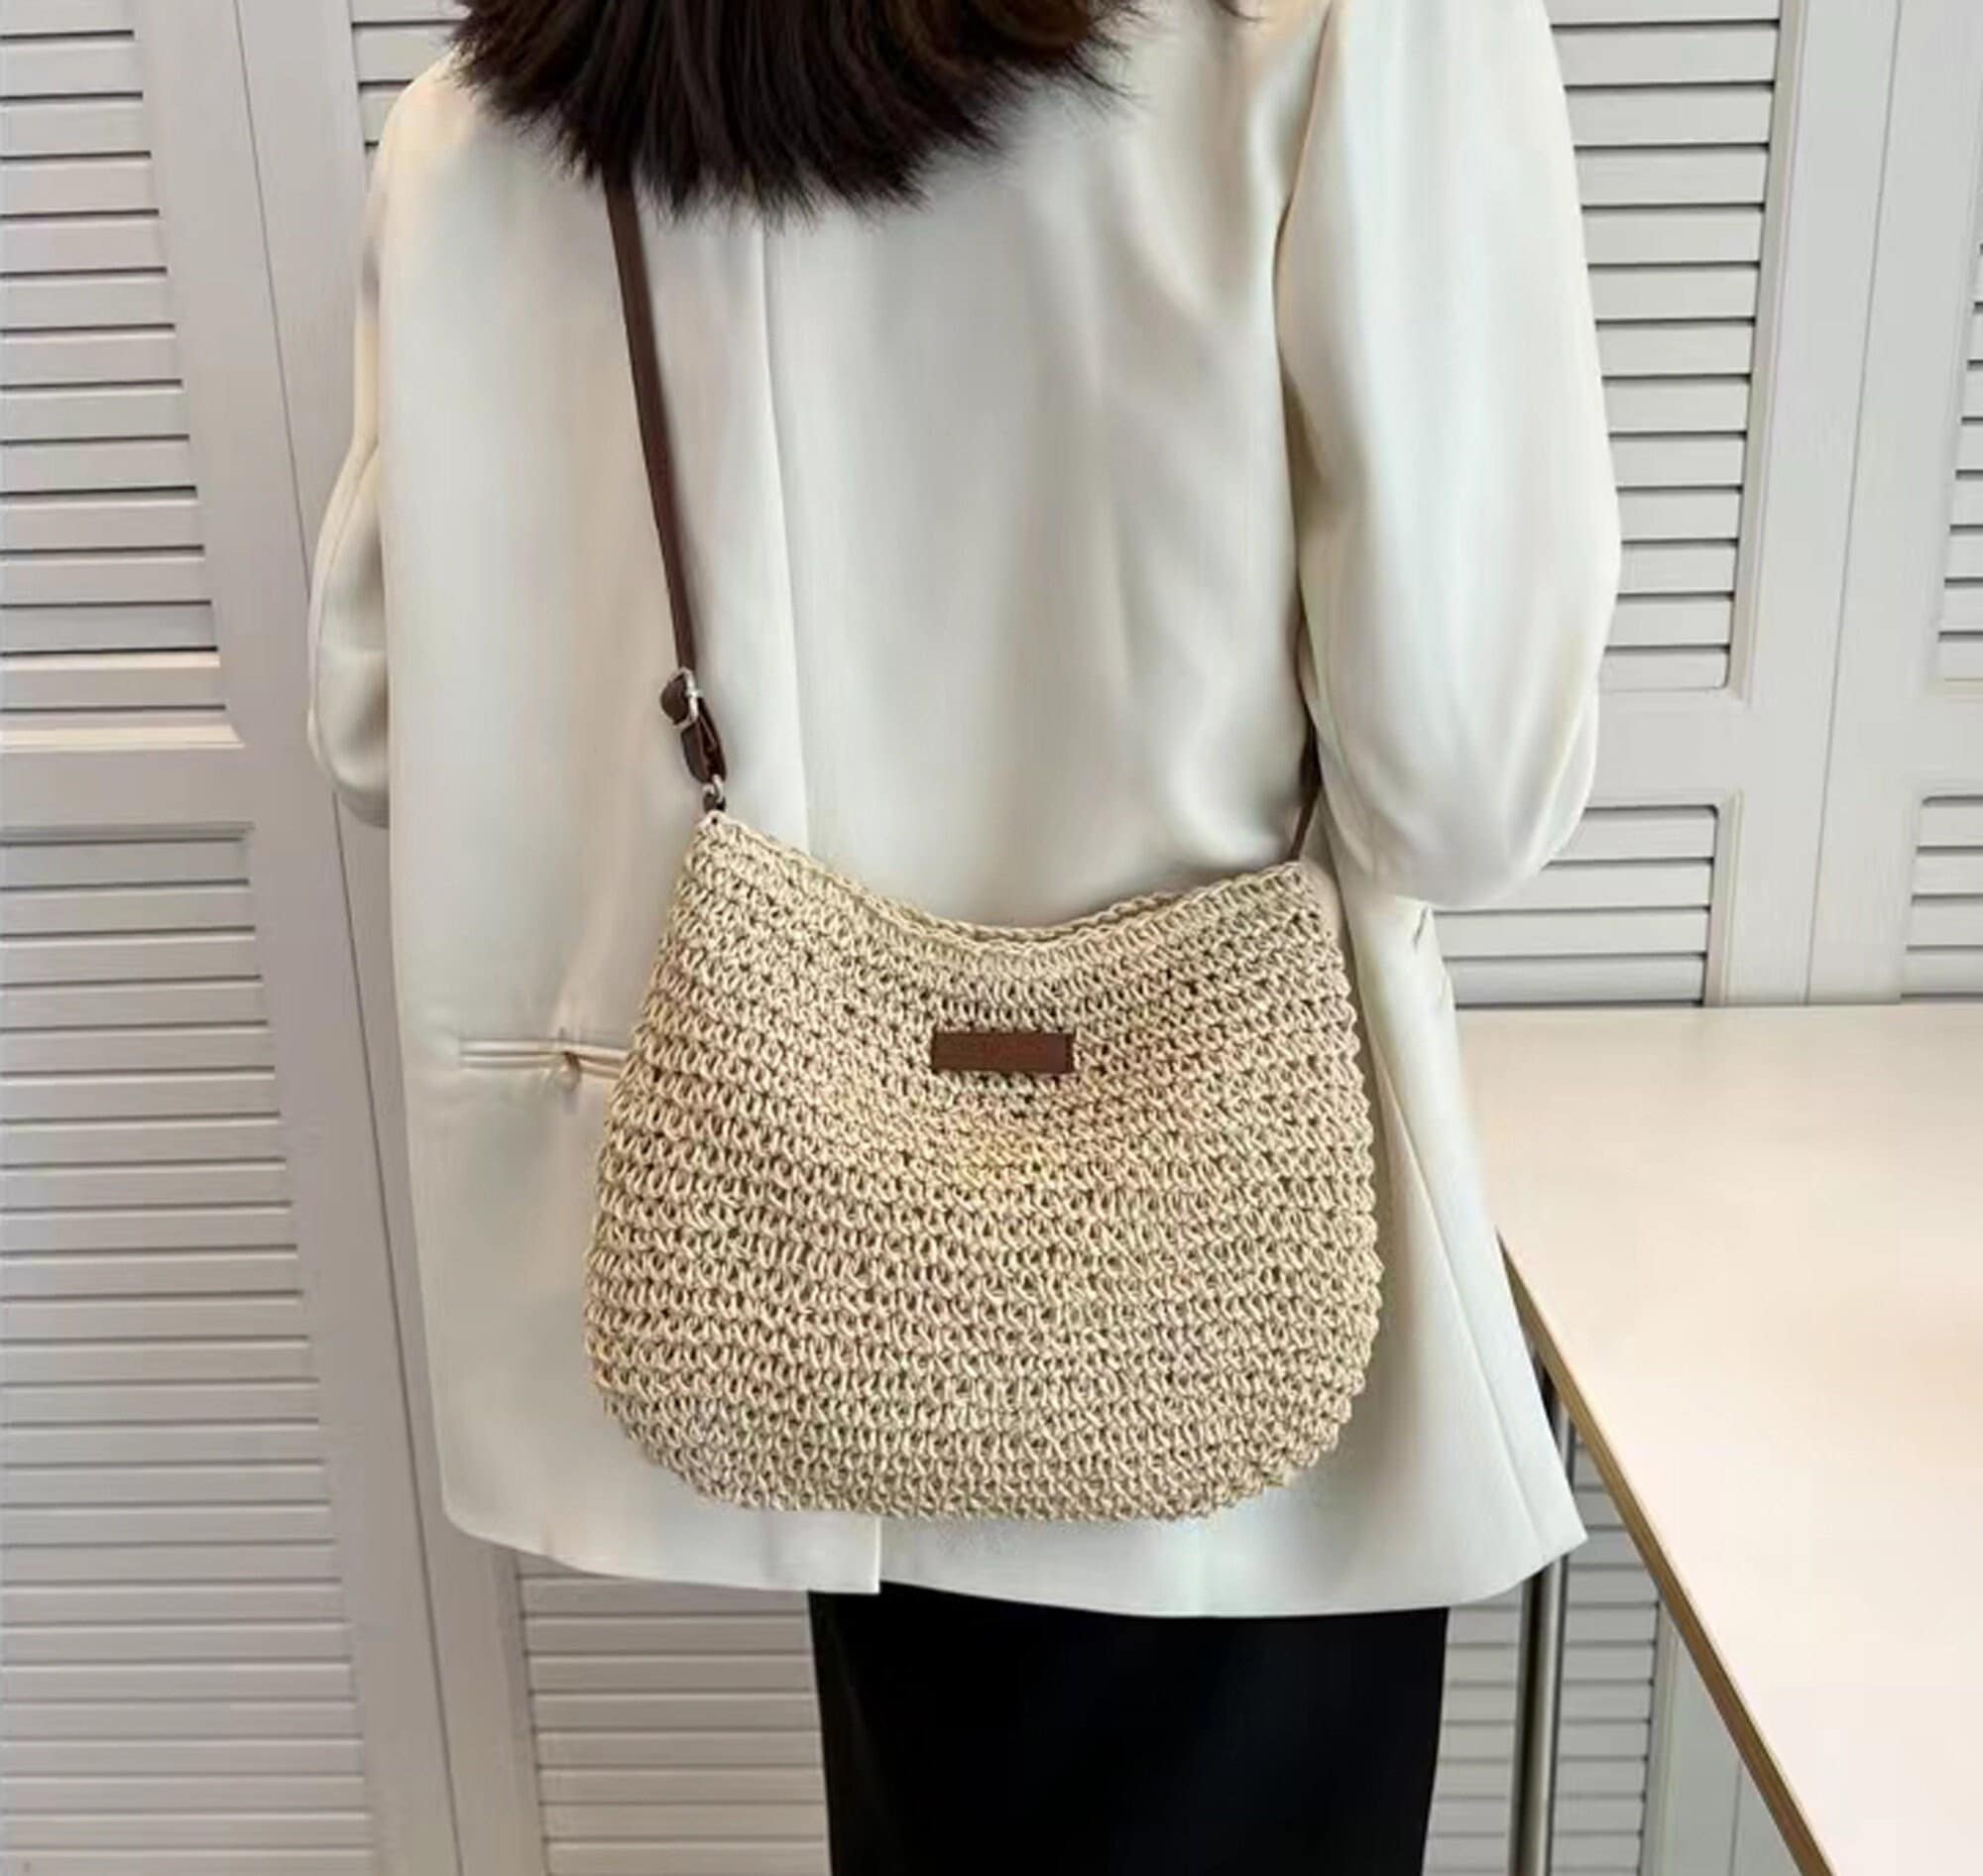 A beige woven leather shoulder bag, '80s, 22by30cm.